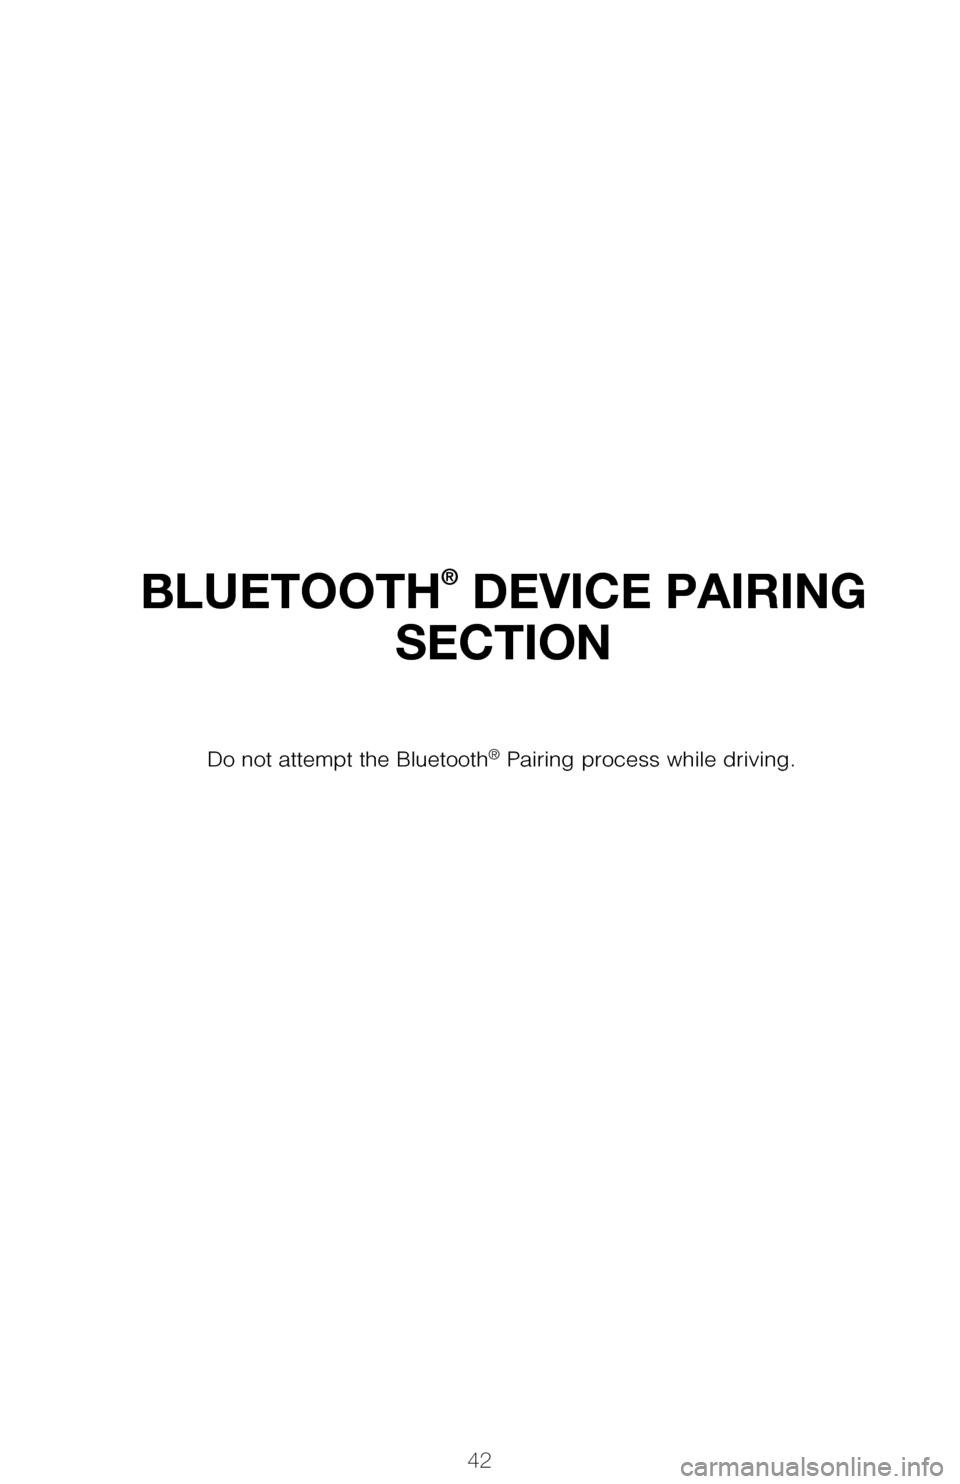 TOYOTA PRIUS 2017 4.G Quick Reference Guide BLUETOOTH® DEVICE PAIRING 
SECTION
Pairing your phone is the first step in connecting with your Toyota for hands-f\
ree 
calling and for audio streaming via Bluetooth. This pairing process is quick a